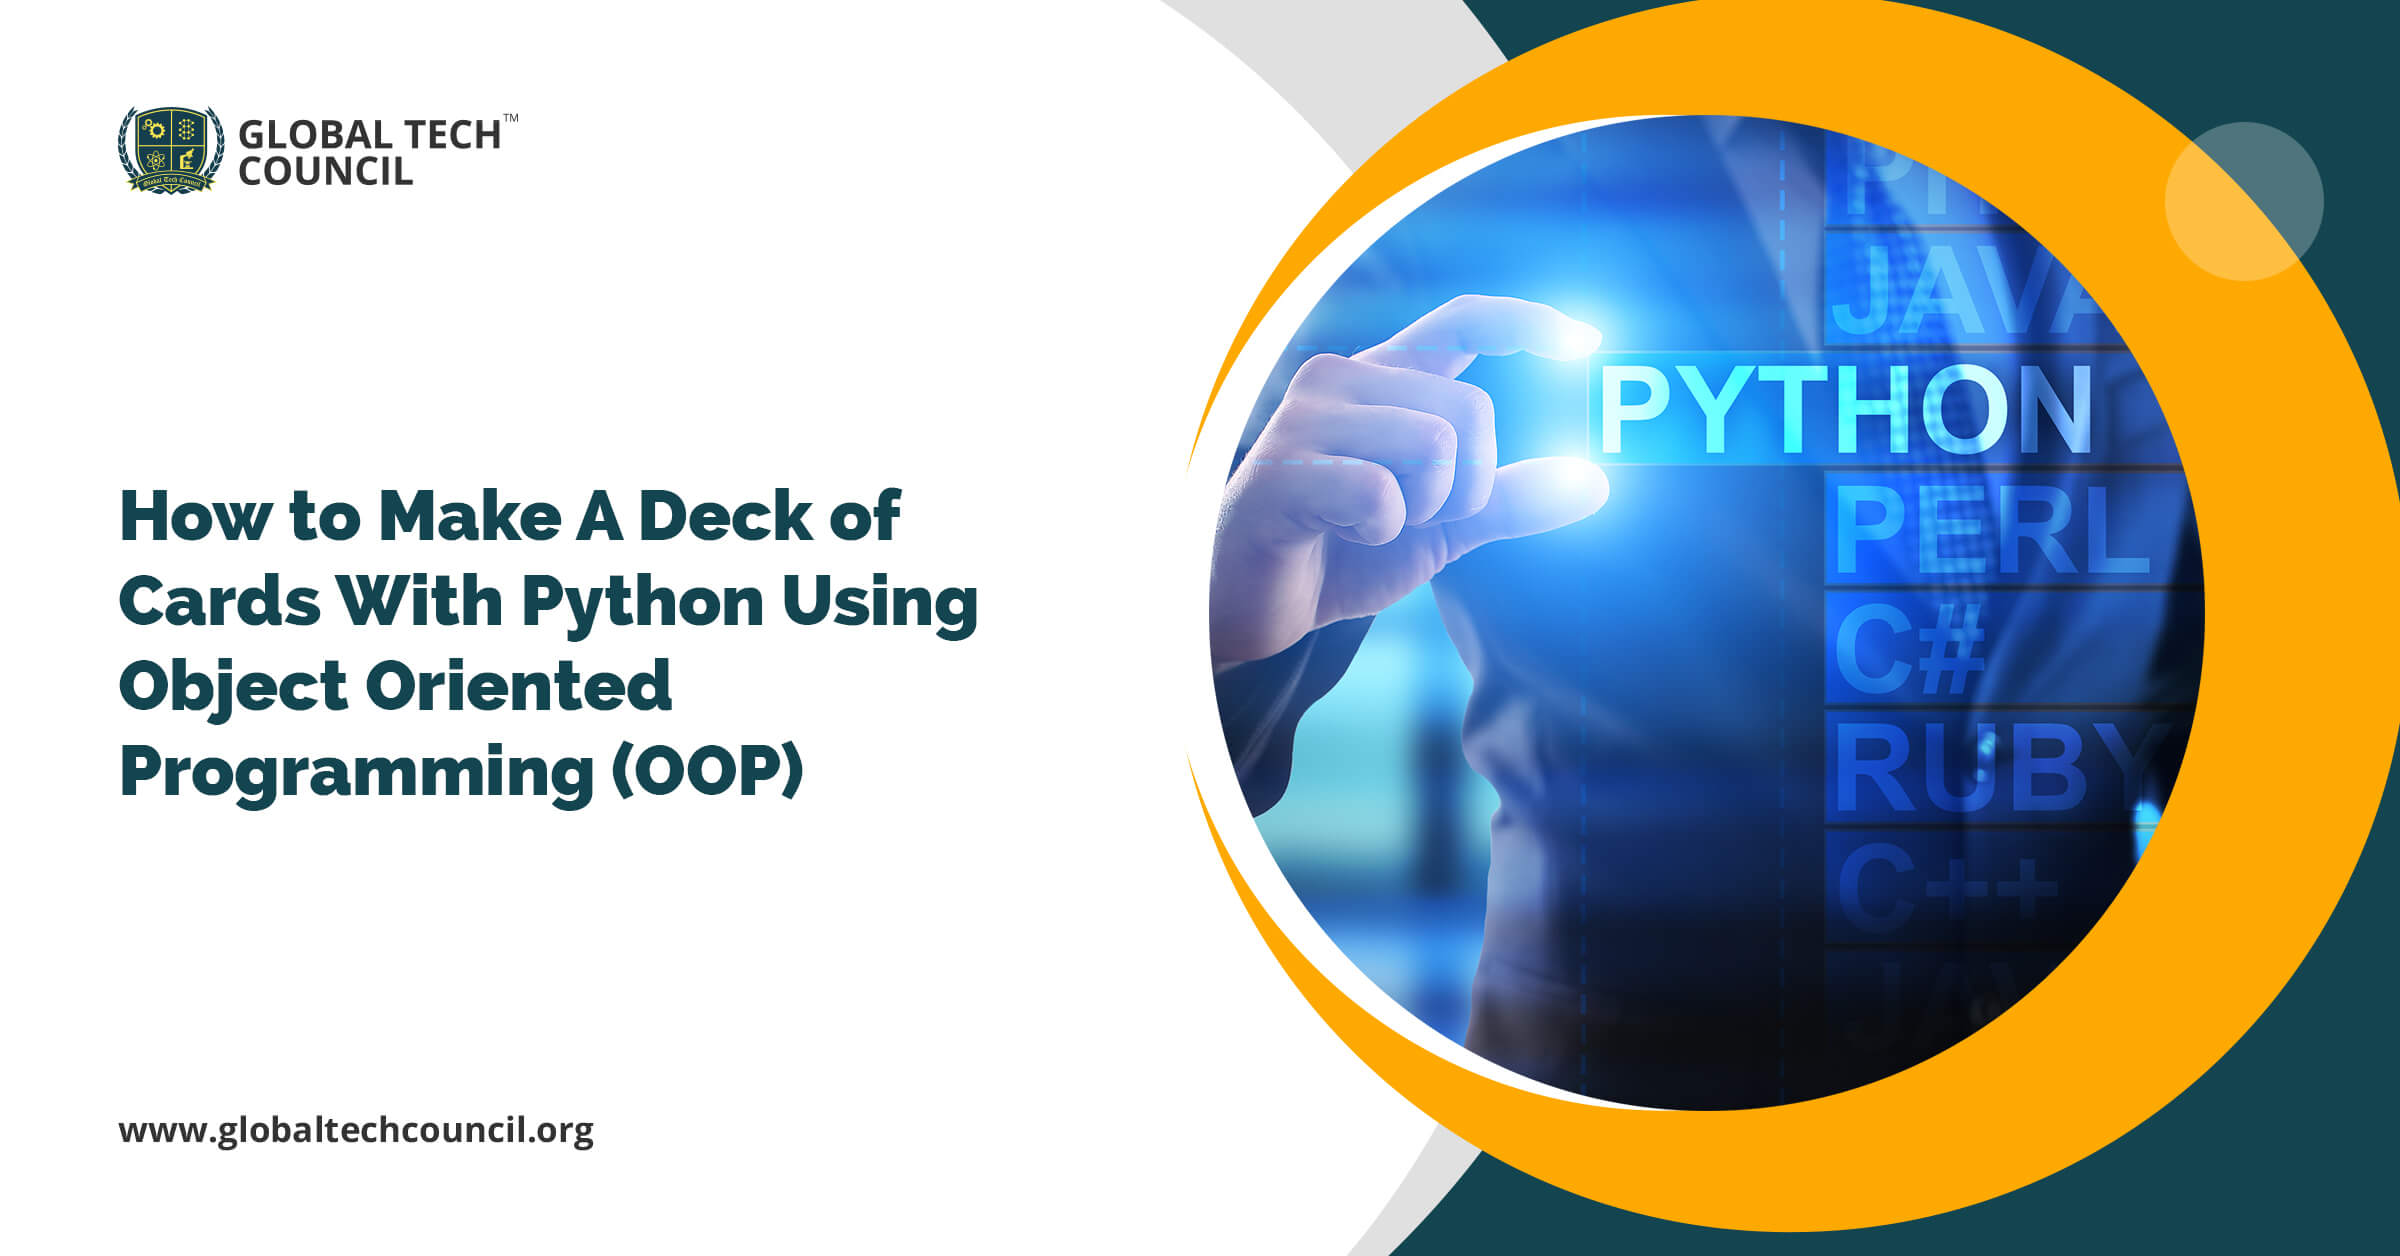 How to Make A Deck of Cards With Python Using Object Oriented Programming (OOP)